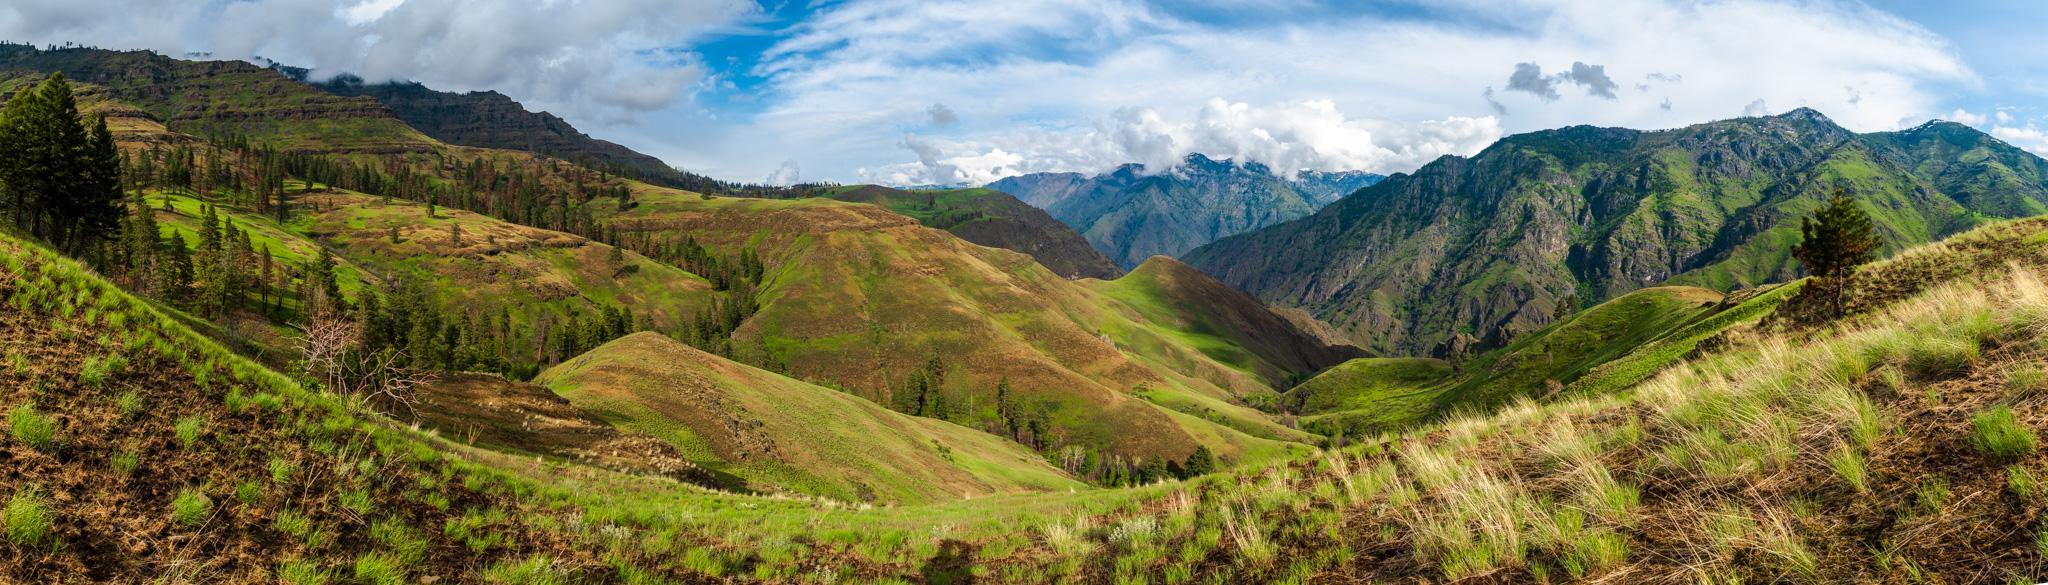 Panoramic views from the Bench Trail in Hells Canyon